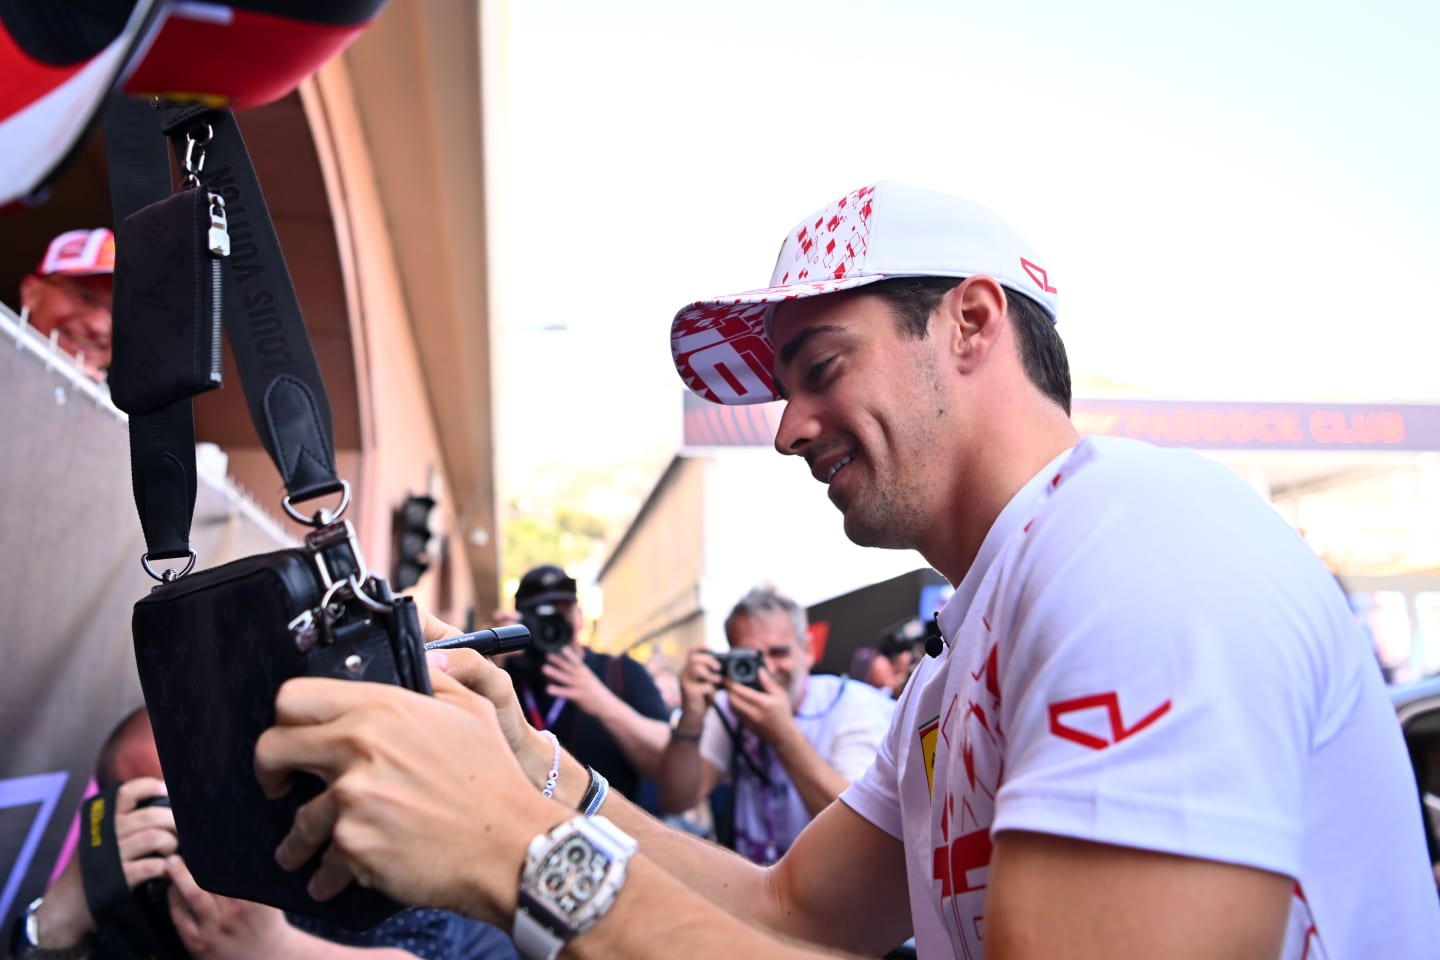 MONTE-CARLO, MONACO - MAY 26: Charles Leclerc of Monaco and Ferrari signs autographs for fans in